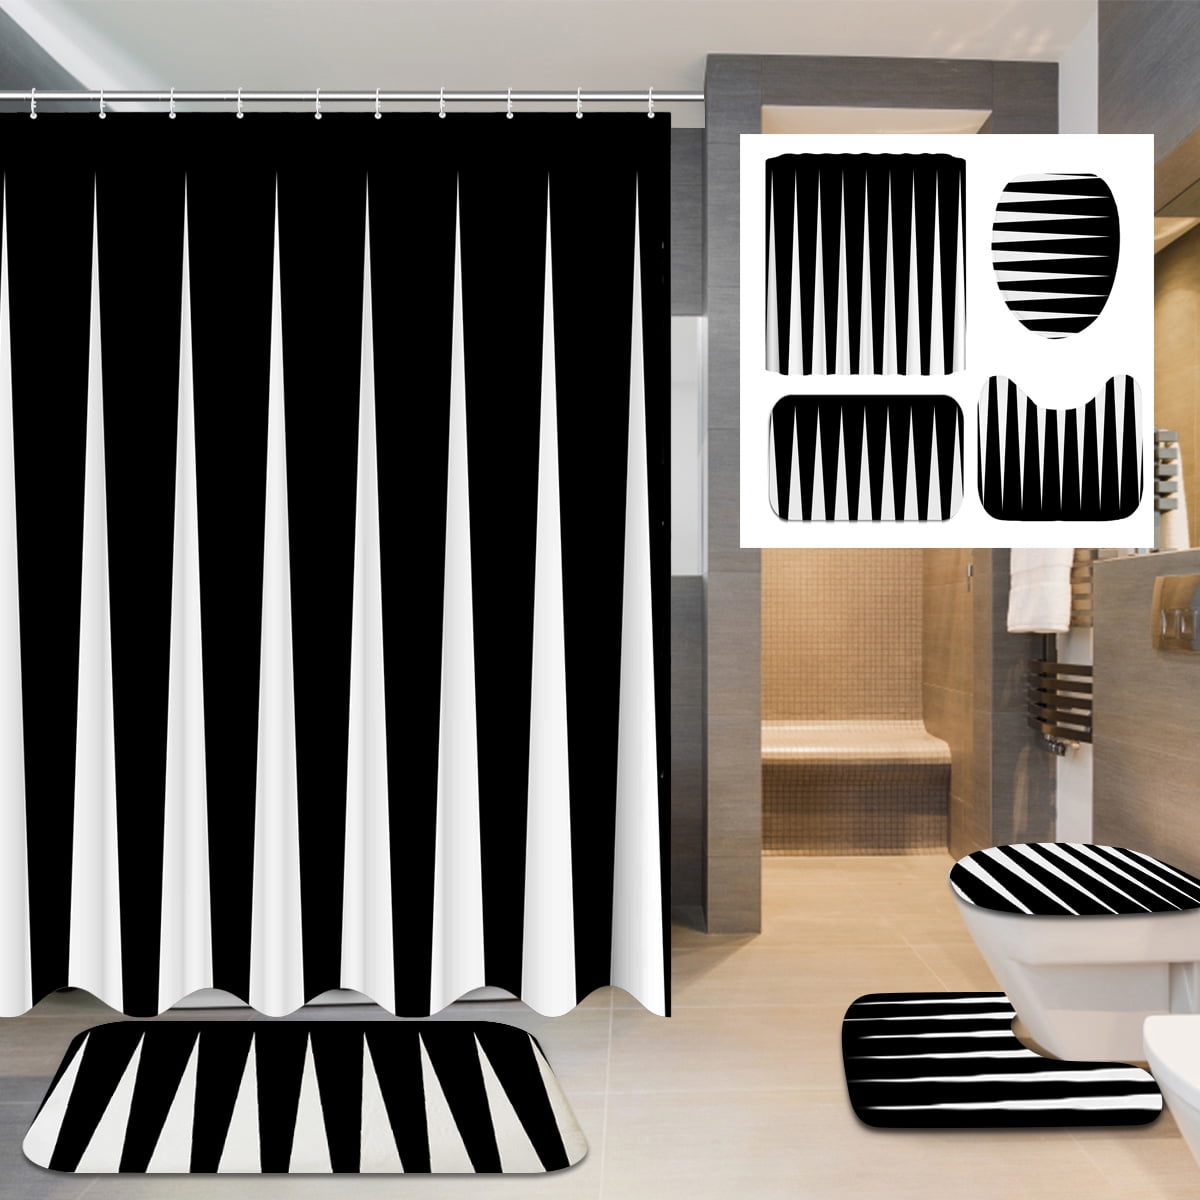 Abstract Black and White Shower Curtain Liner Waterproof Fabric Bathroom Mat Set 